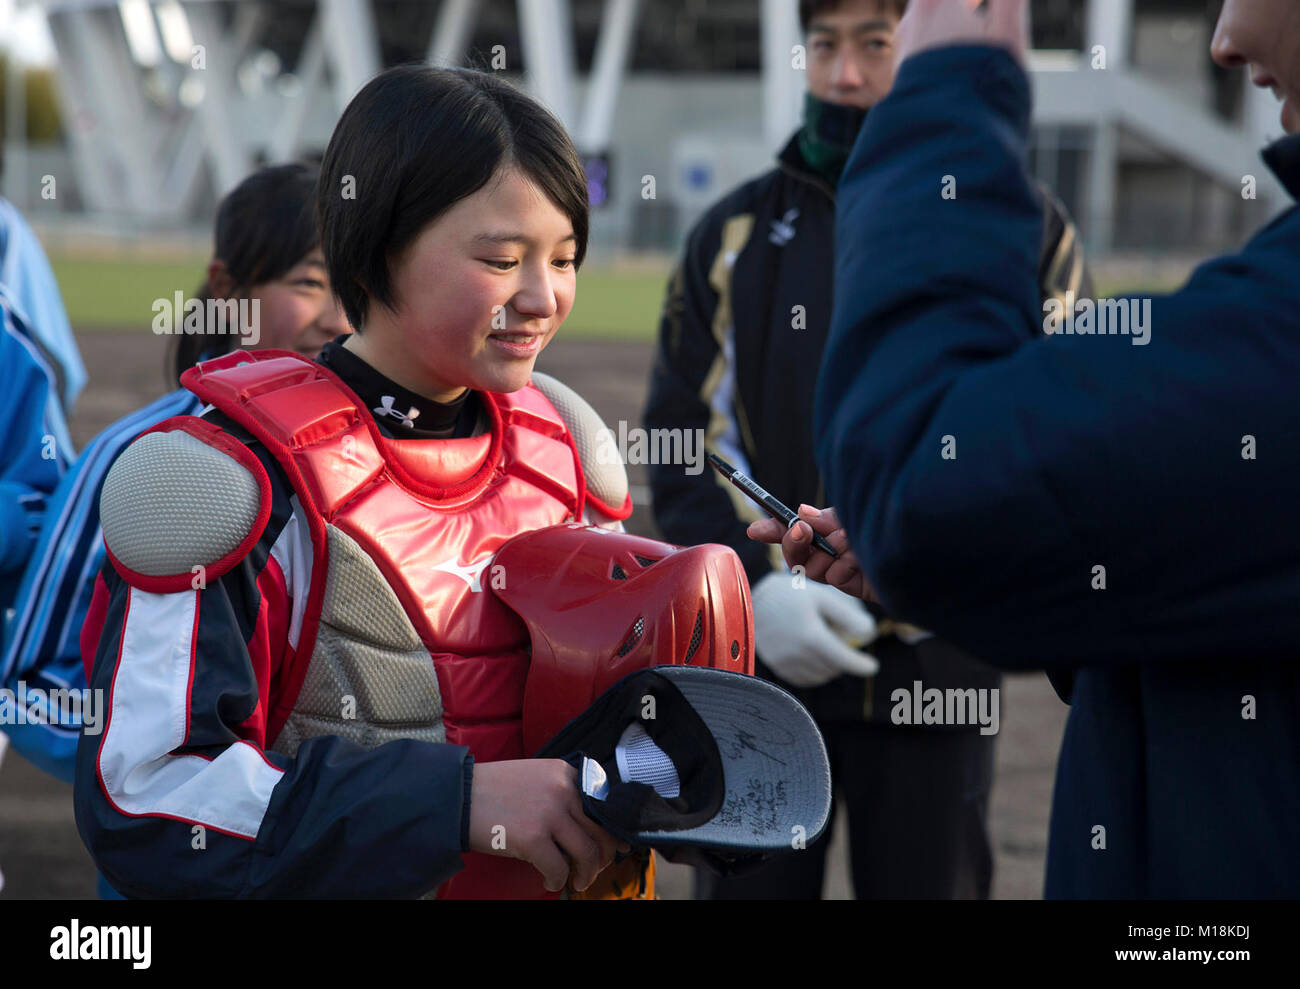 Valerie Arioto, an infielder with the U.S.A. National Women’s Softball team signs a softball cap for a child from the Higashi Middle School softball team at the new Kizuna stadium in Iwakuni City, Japan, Jan. 25, 2018. The U.S.A National Women’s Softball team visited players from middle and elementary schools to practice together. The intent of the U.S. softball team’s visit was to determine if the stadium is suitable for the team to practice and play future games at. The stadium is a hallmark of what the U.S.-Japan friendship has accomplished in Iwakuni City. Everything from the dogwood trees Stock Photo